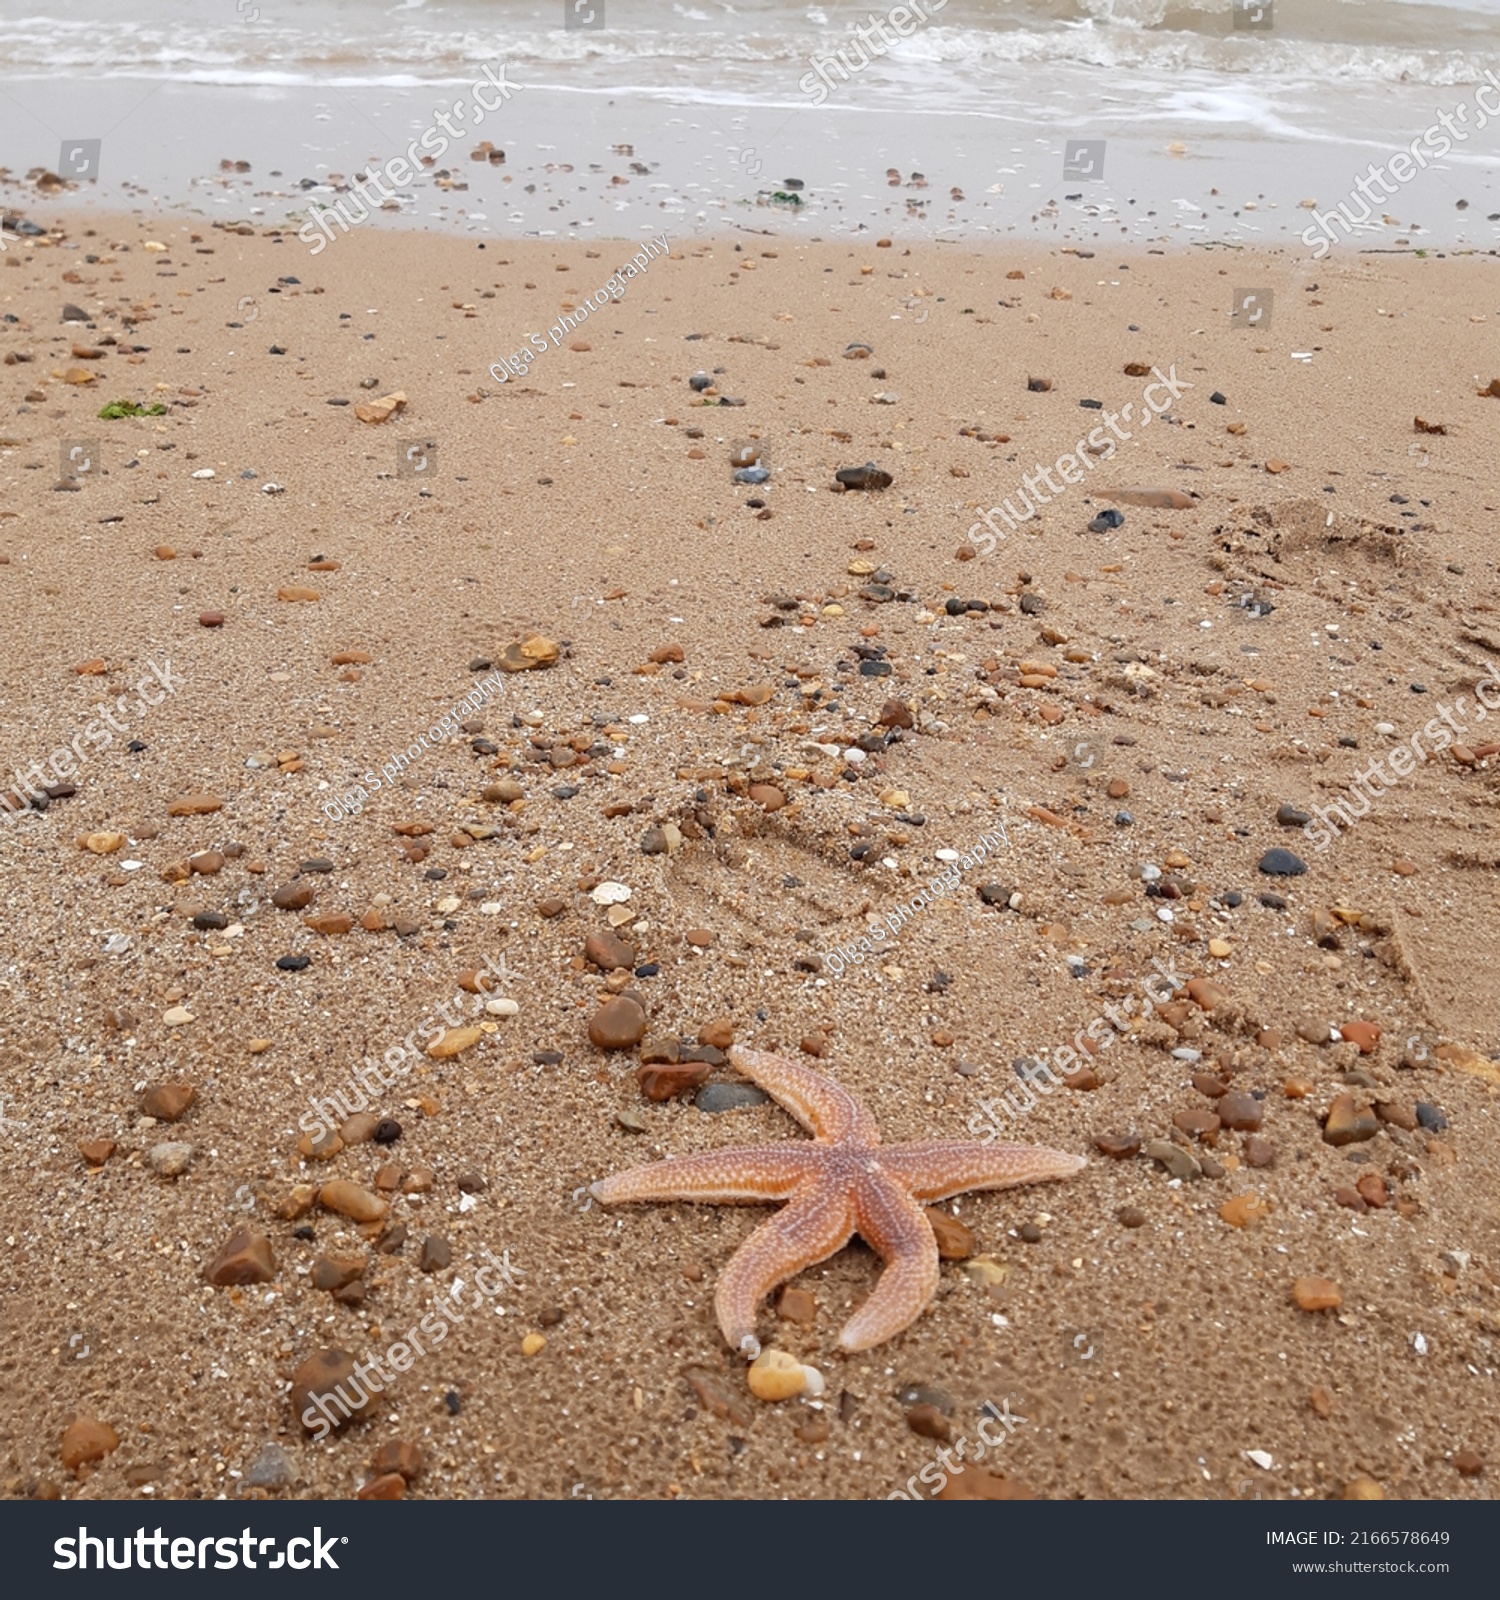 Starfish or sea stars are star-shaped echinoderms belonging to the class Asteroidea. Starfish on the beach in Landguard nature reserve in Felixstowe, Suffolk, East Anglia,  England, Europe. #2166578649